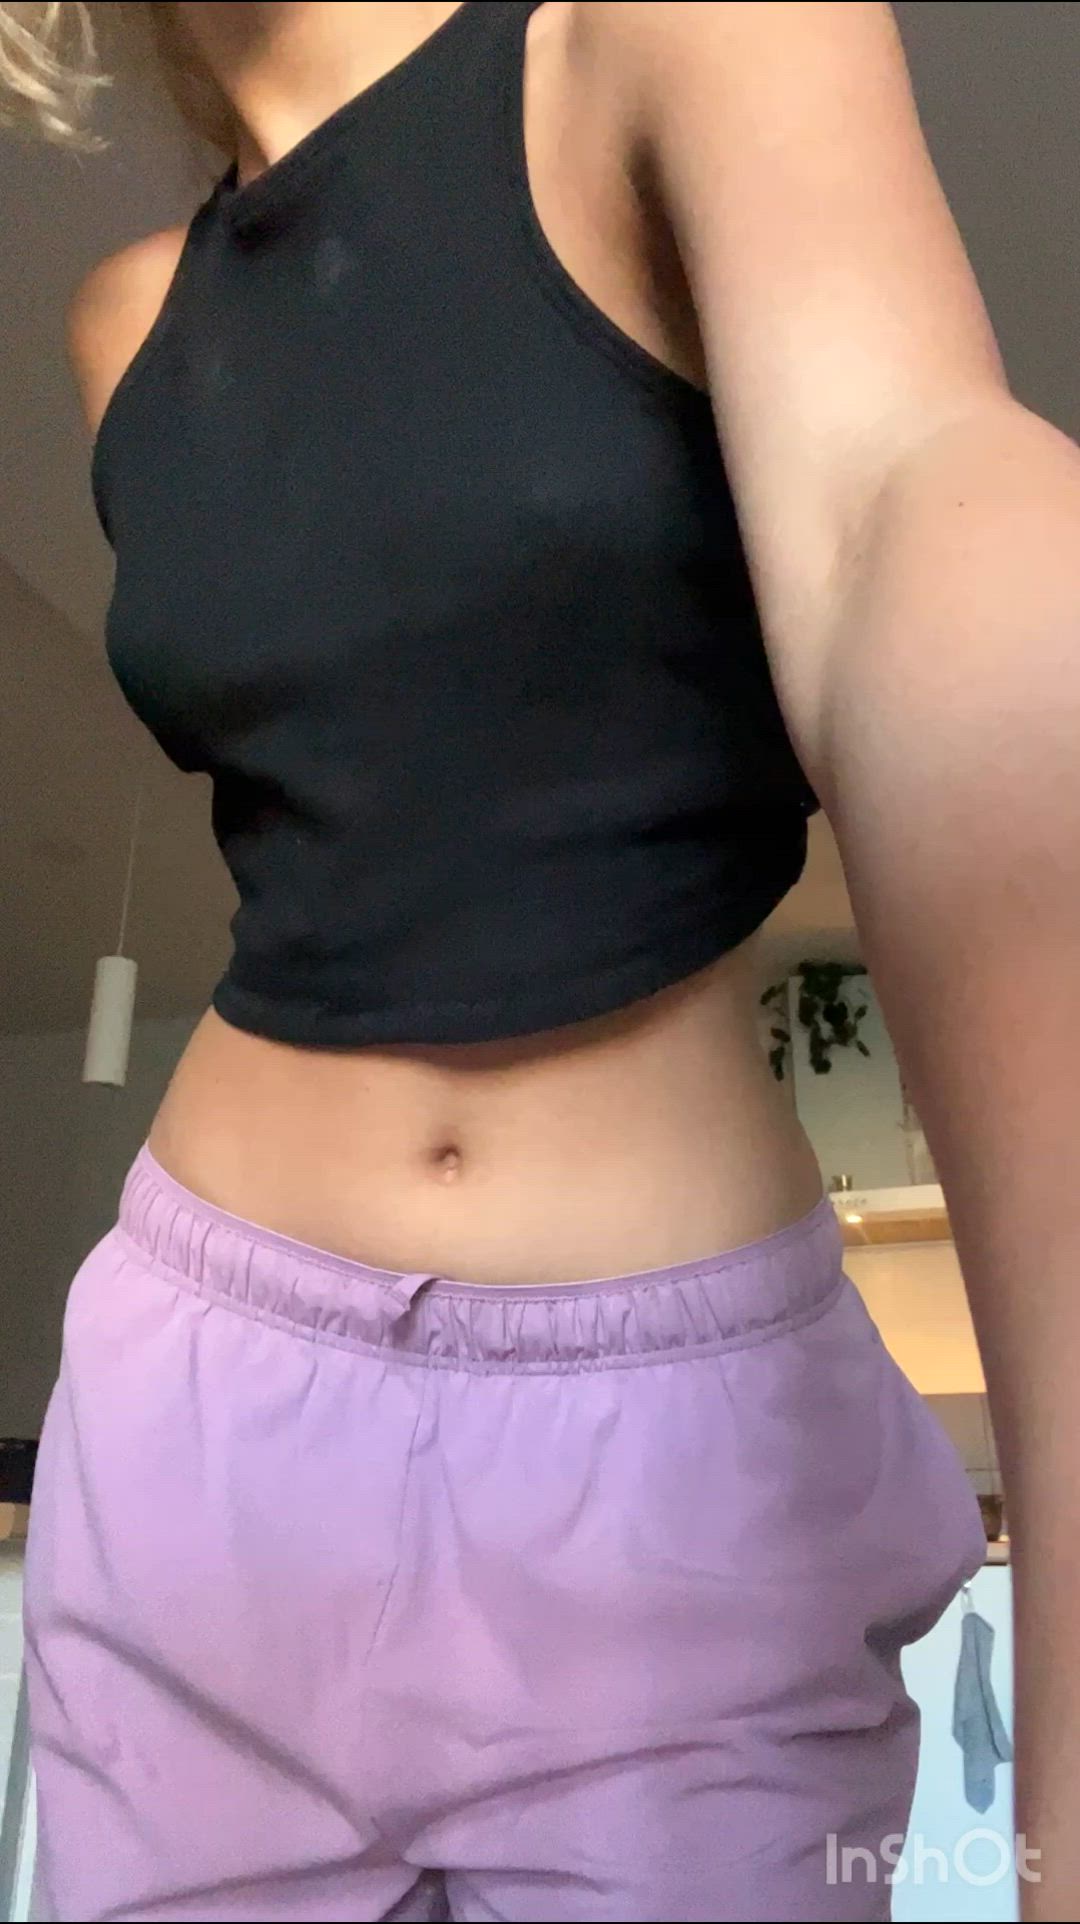 Tits porn video with onlyfans model muzalove <strong>@muza_love</strong>